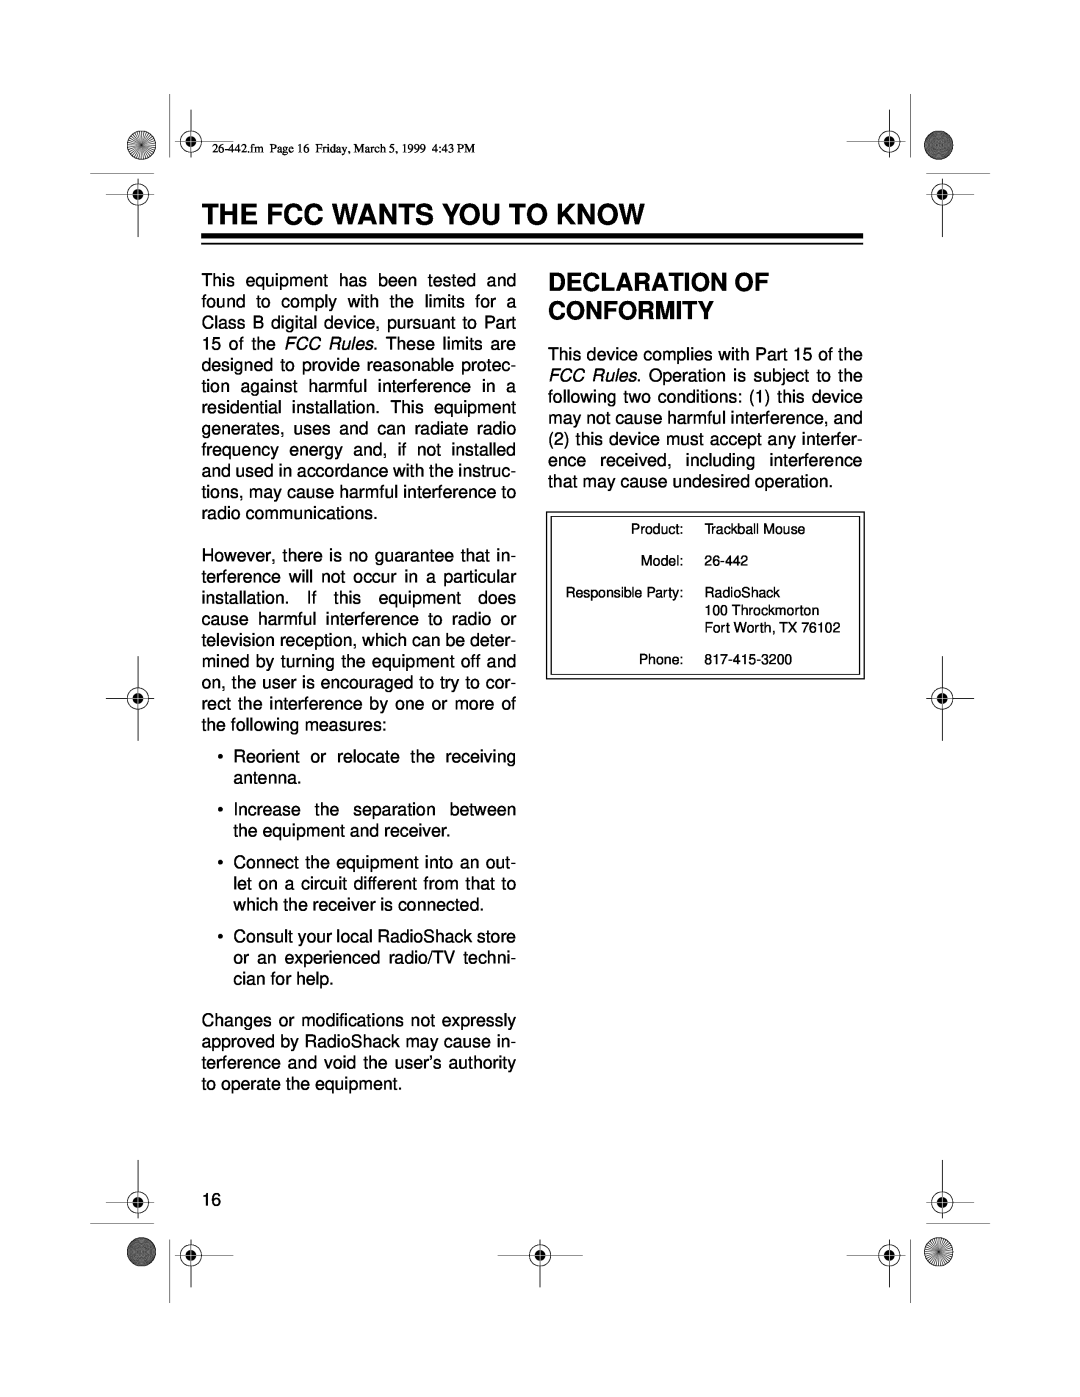 Radio Shack 26-442 owner manual The Fcc Wants You To Know, Declaration Of Conformity 